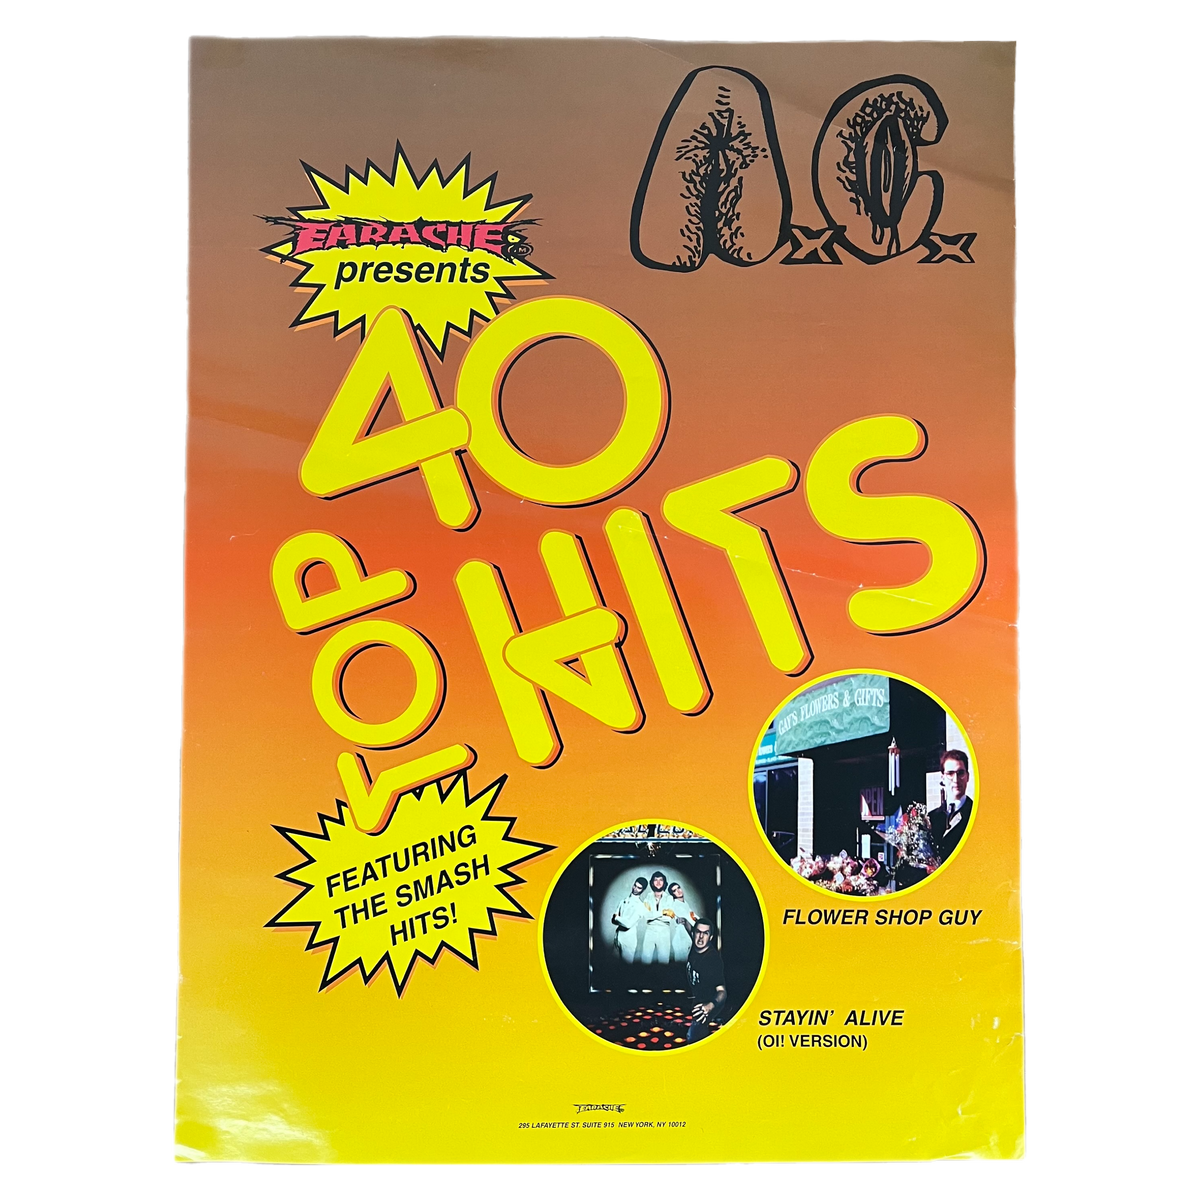 Vintage Anal Cunt &quot;Top 40 Hits&quot; Earache Records Promotional Poster